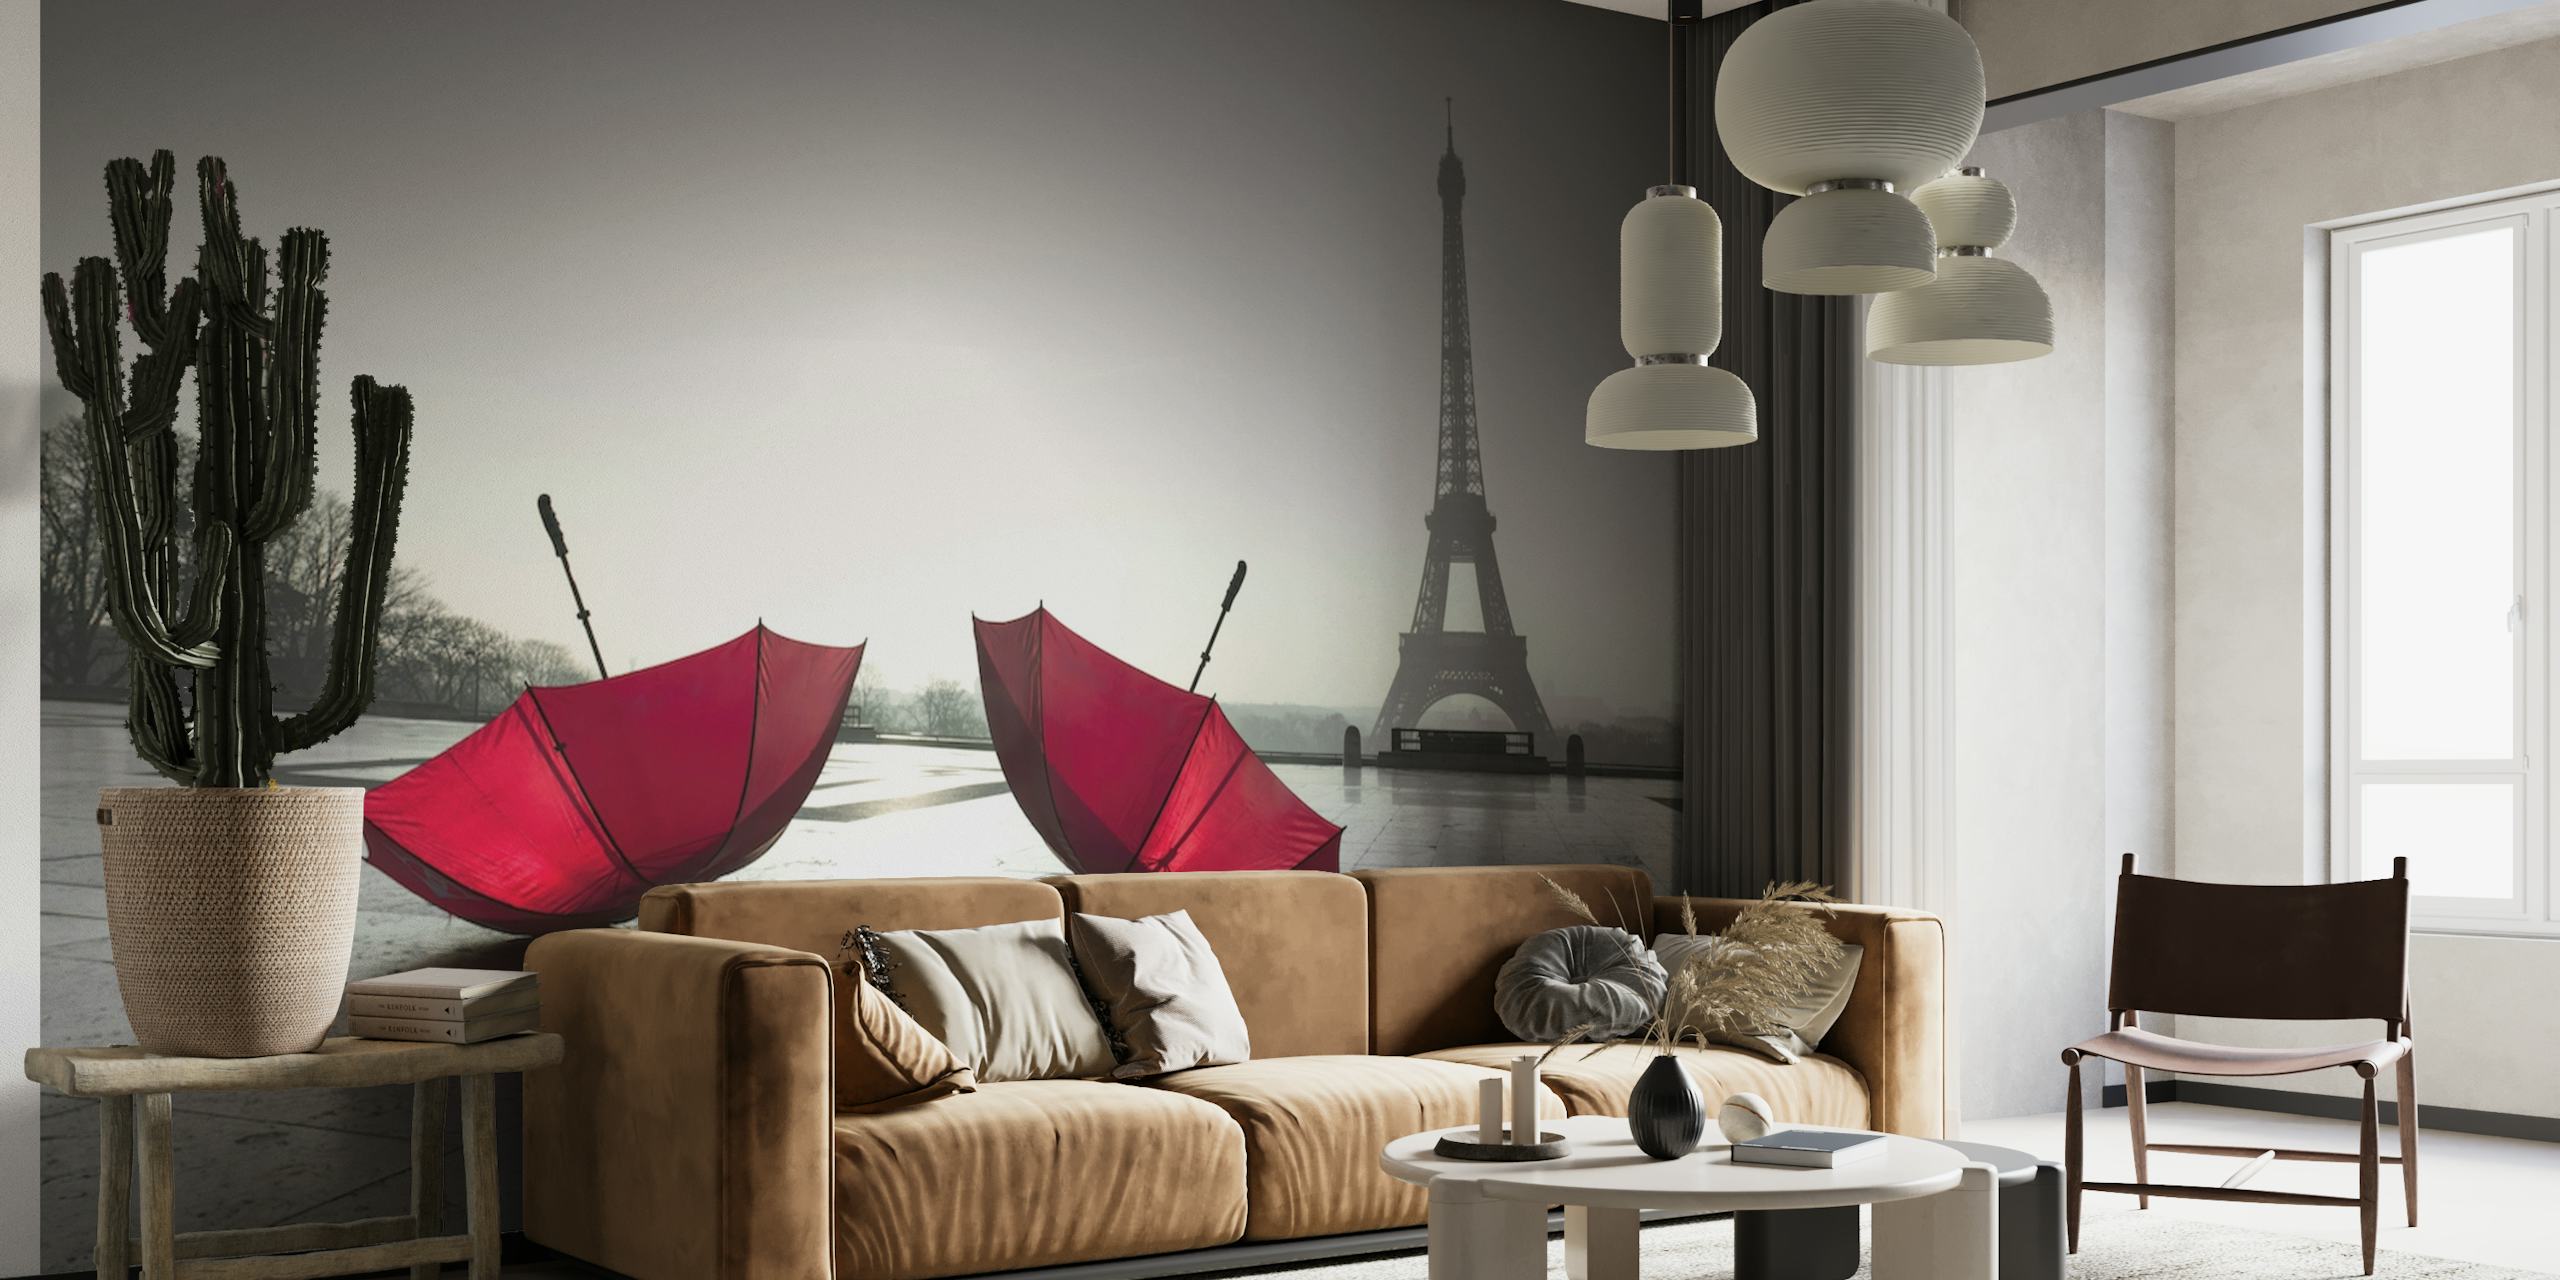 Parisian scene with red umbrellas in front of the Eiffel Tower on a misty morning.